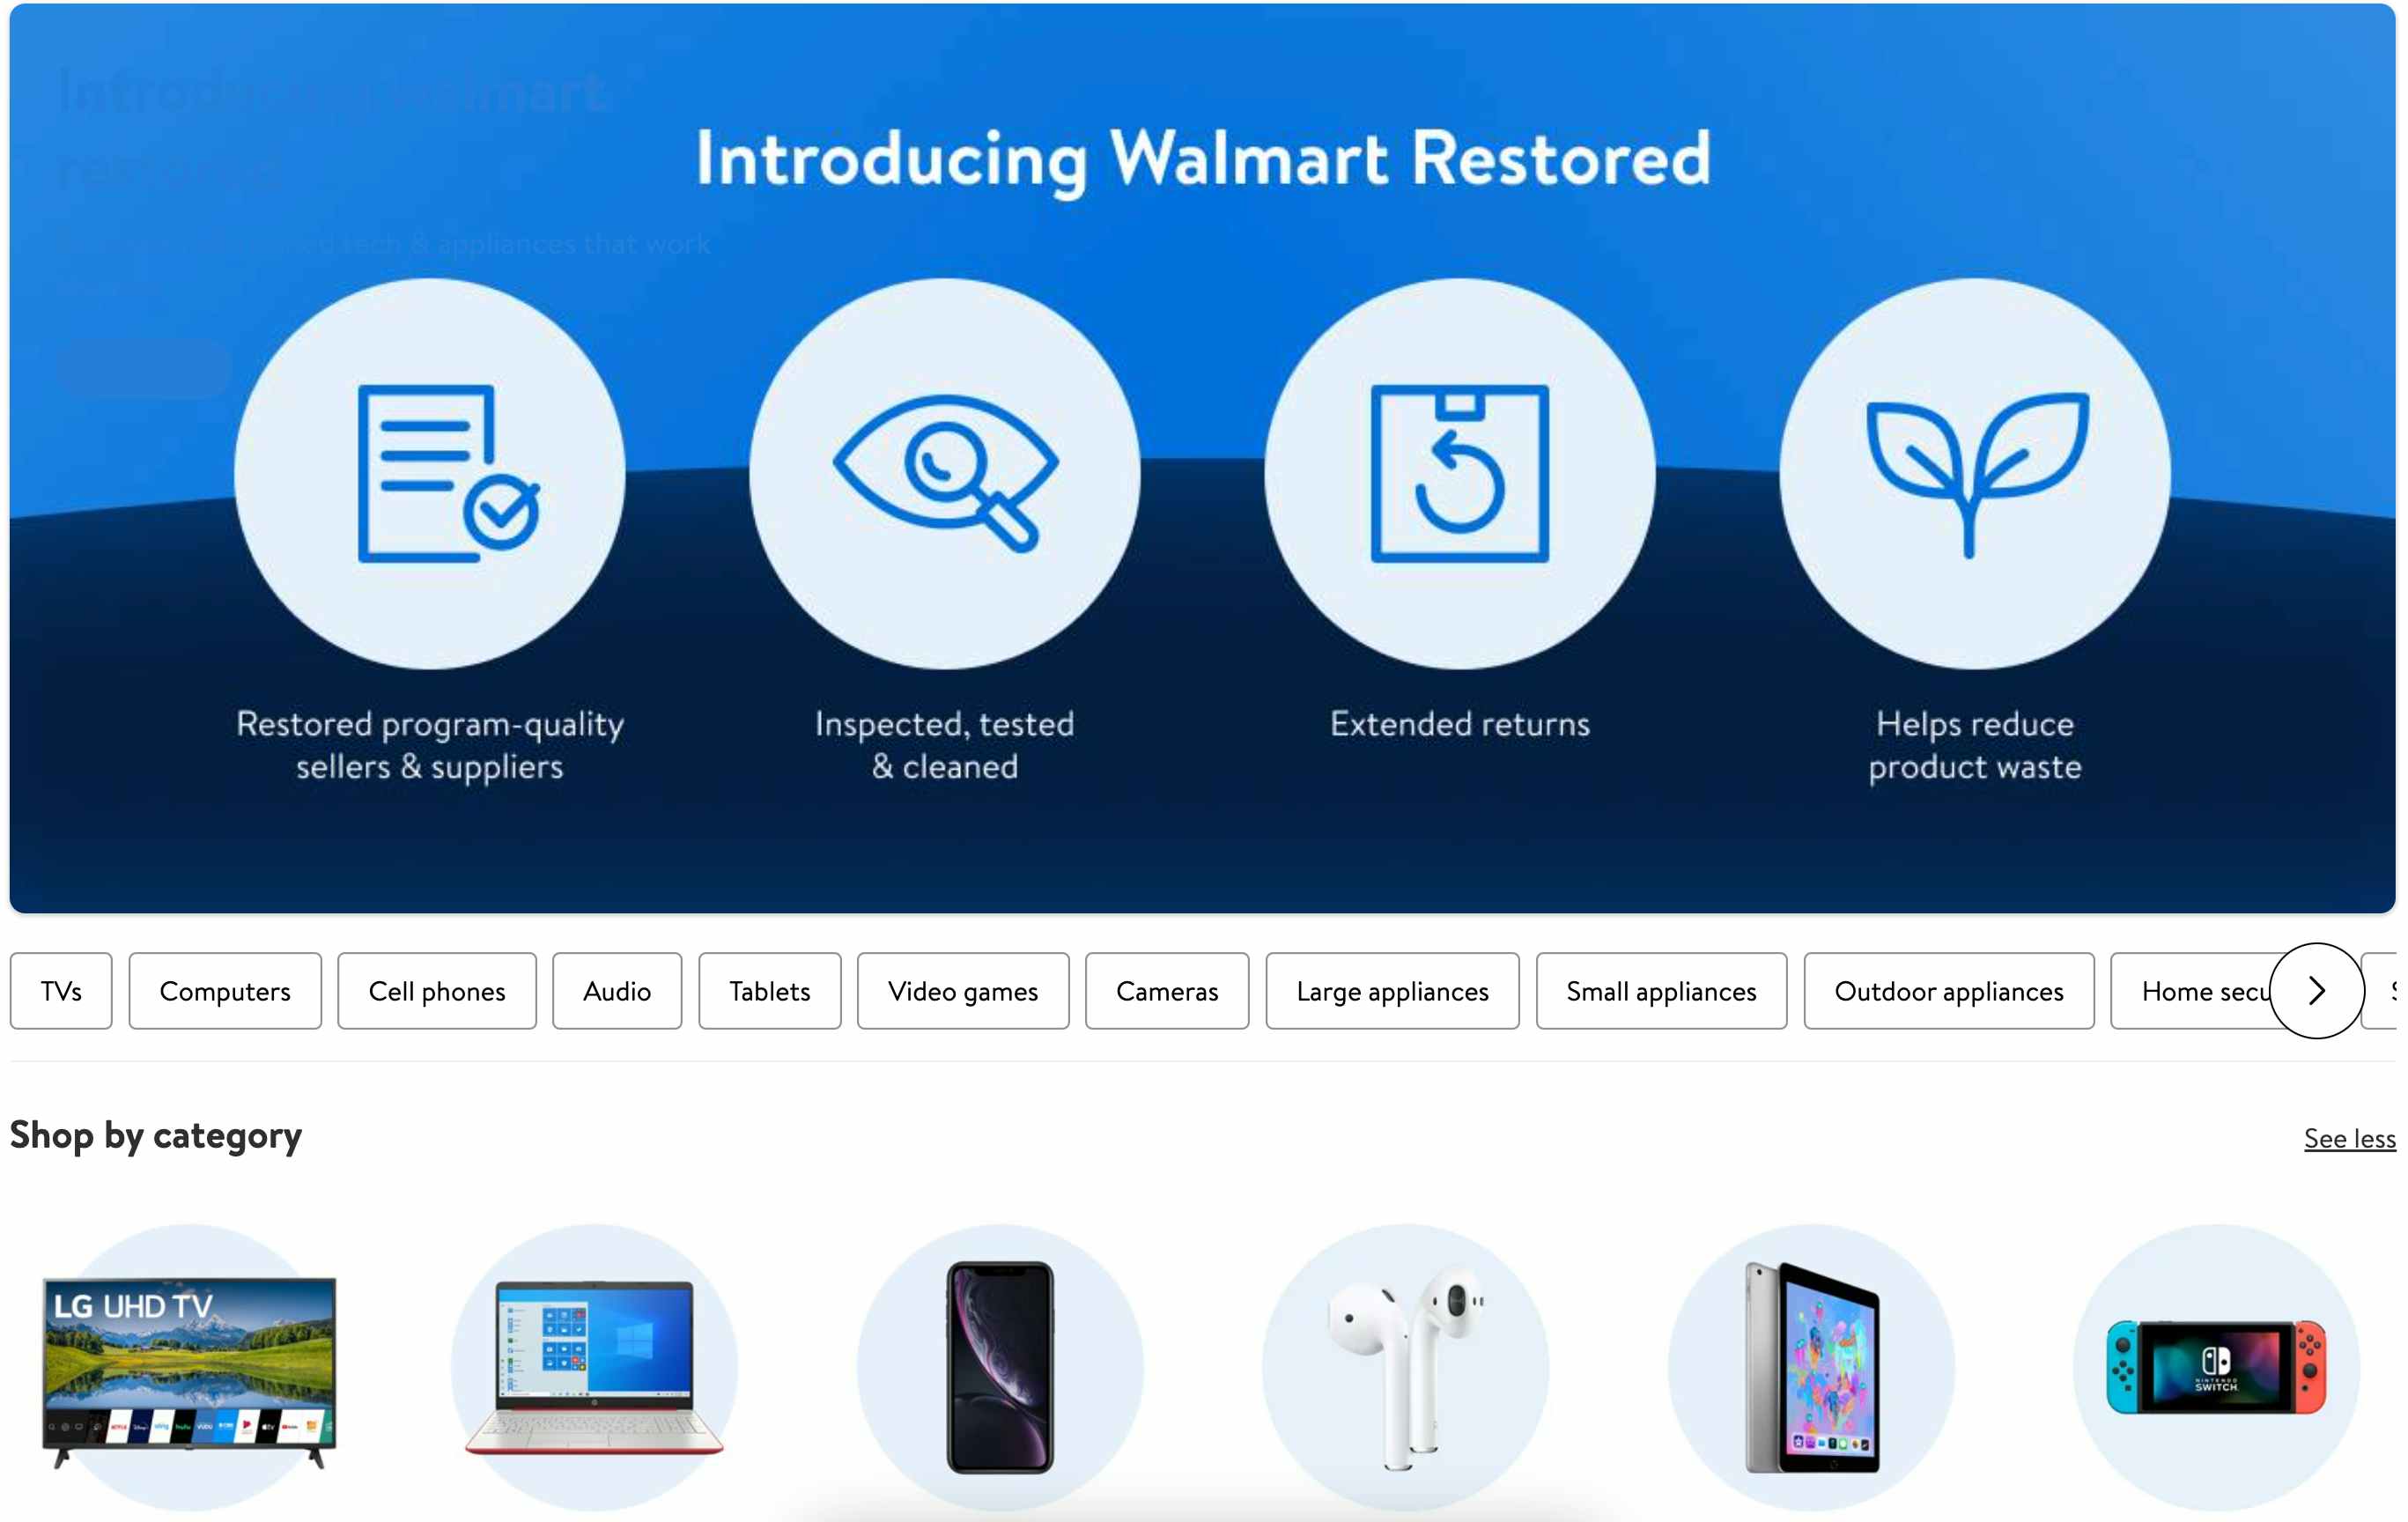 The Walmart Restored website landing page with refurbished products listed.